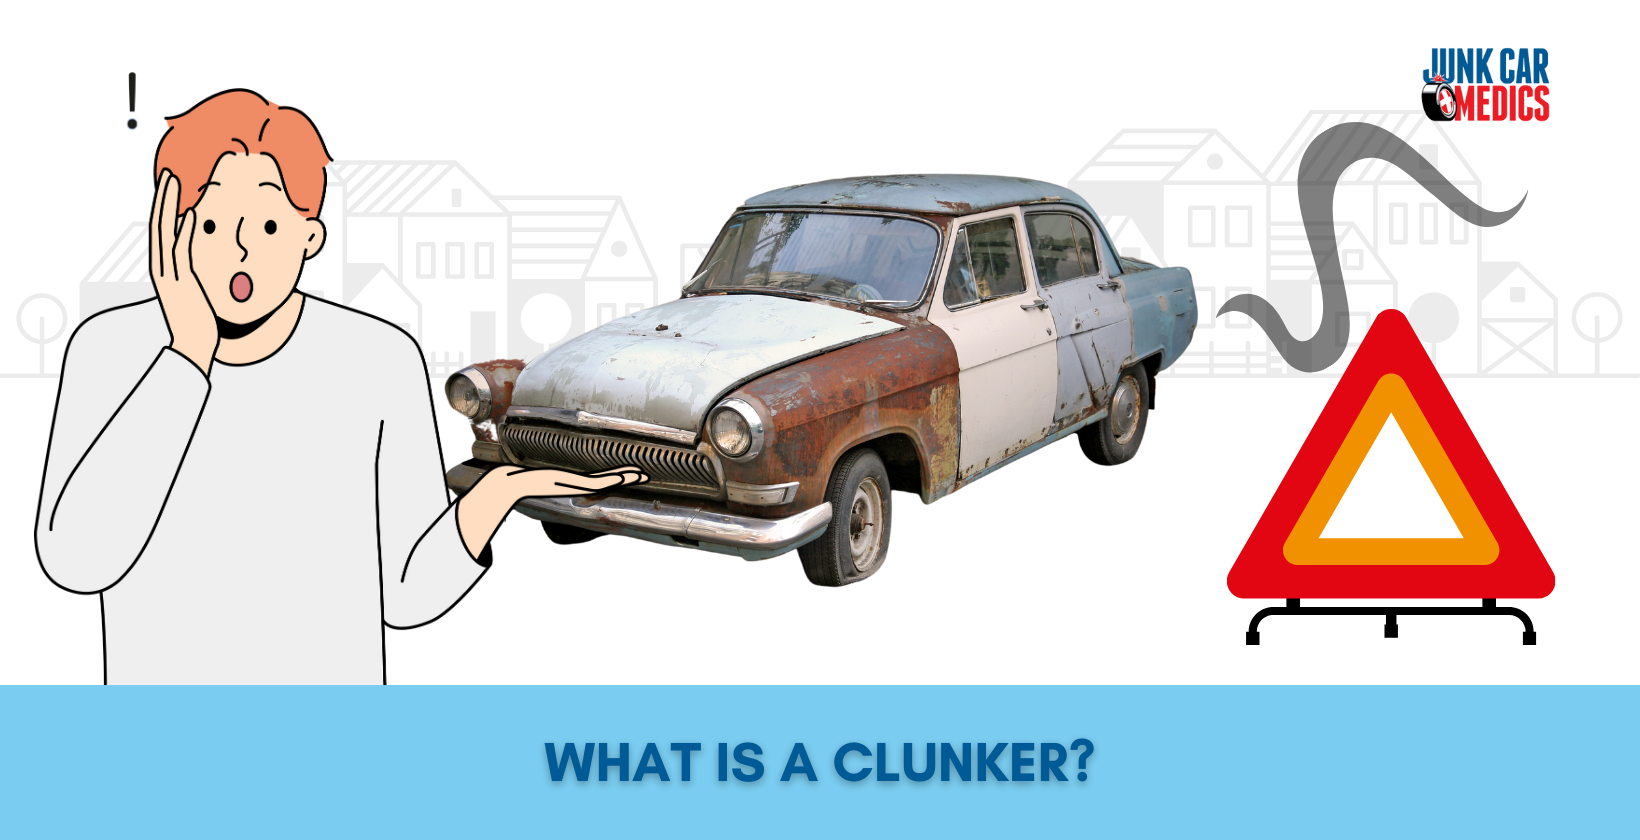 What is a Clunker?